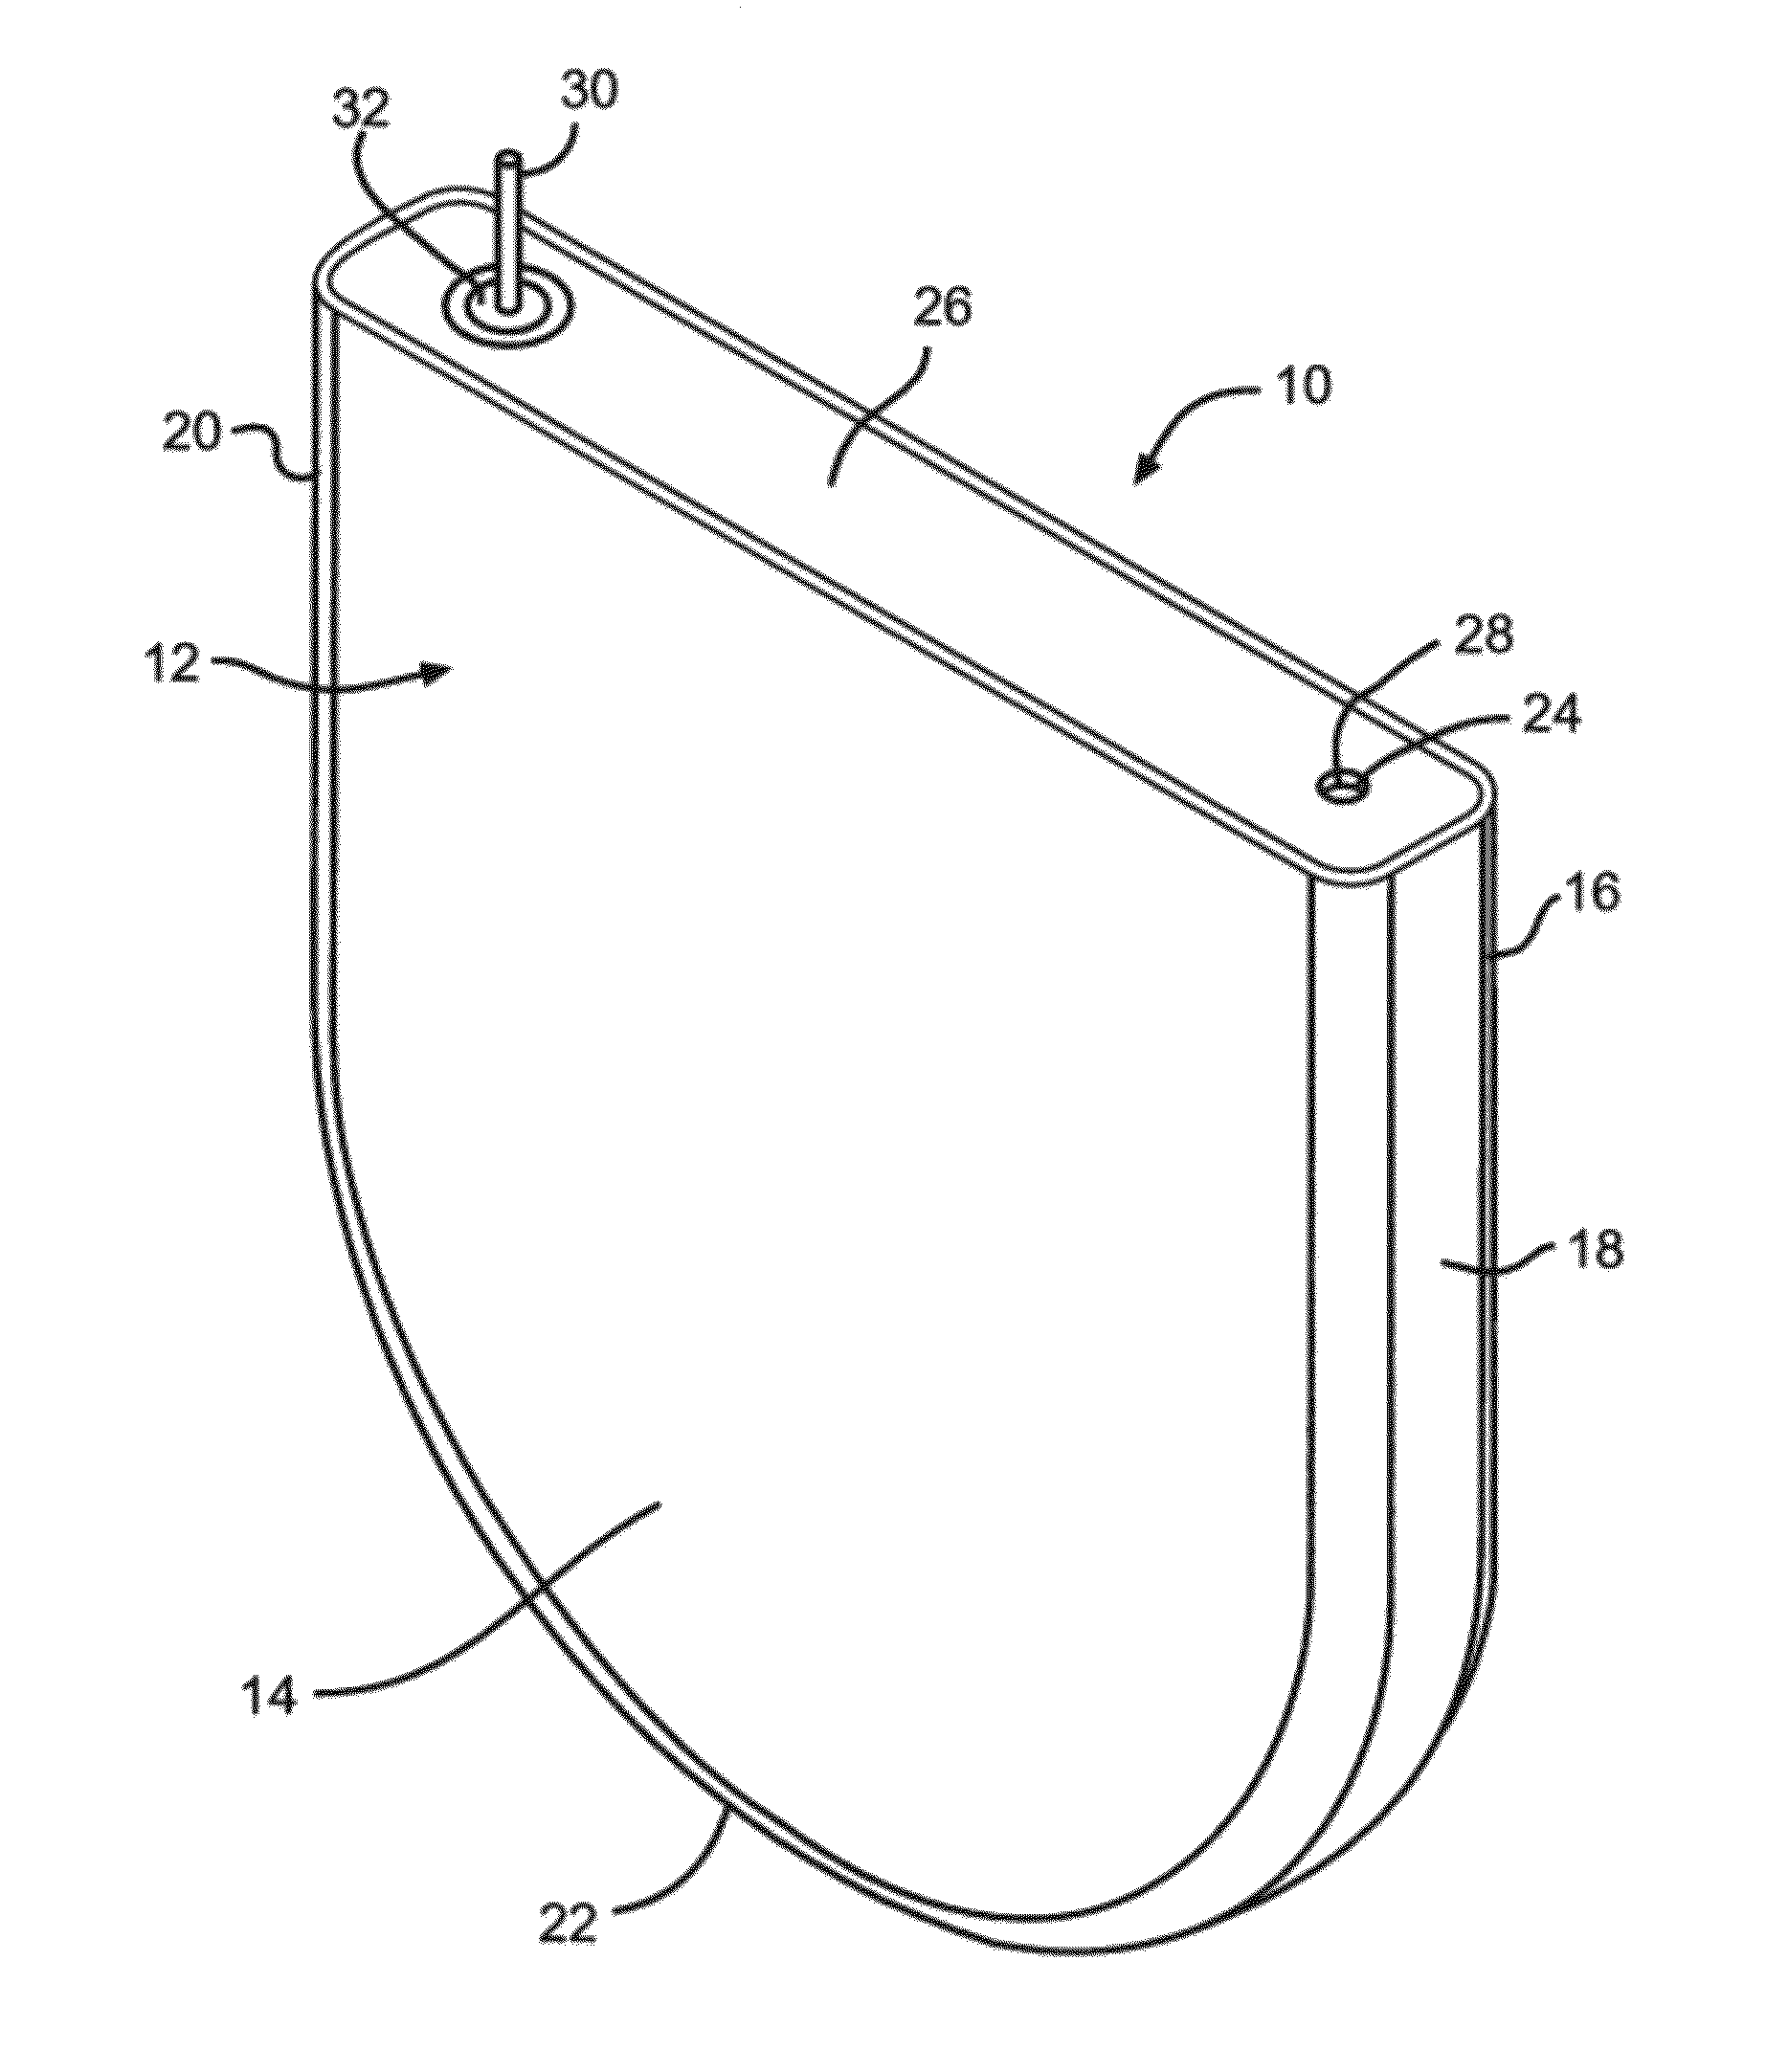 Dissimilar Material Battery Enclosure for Improved Weld Structure